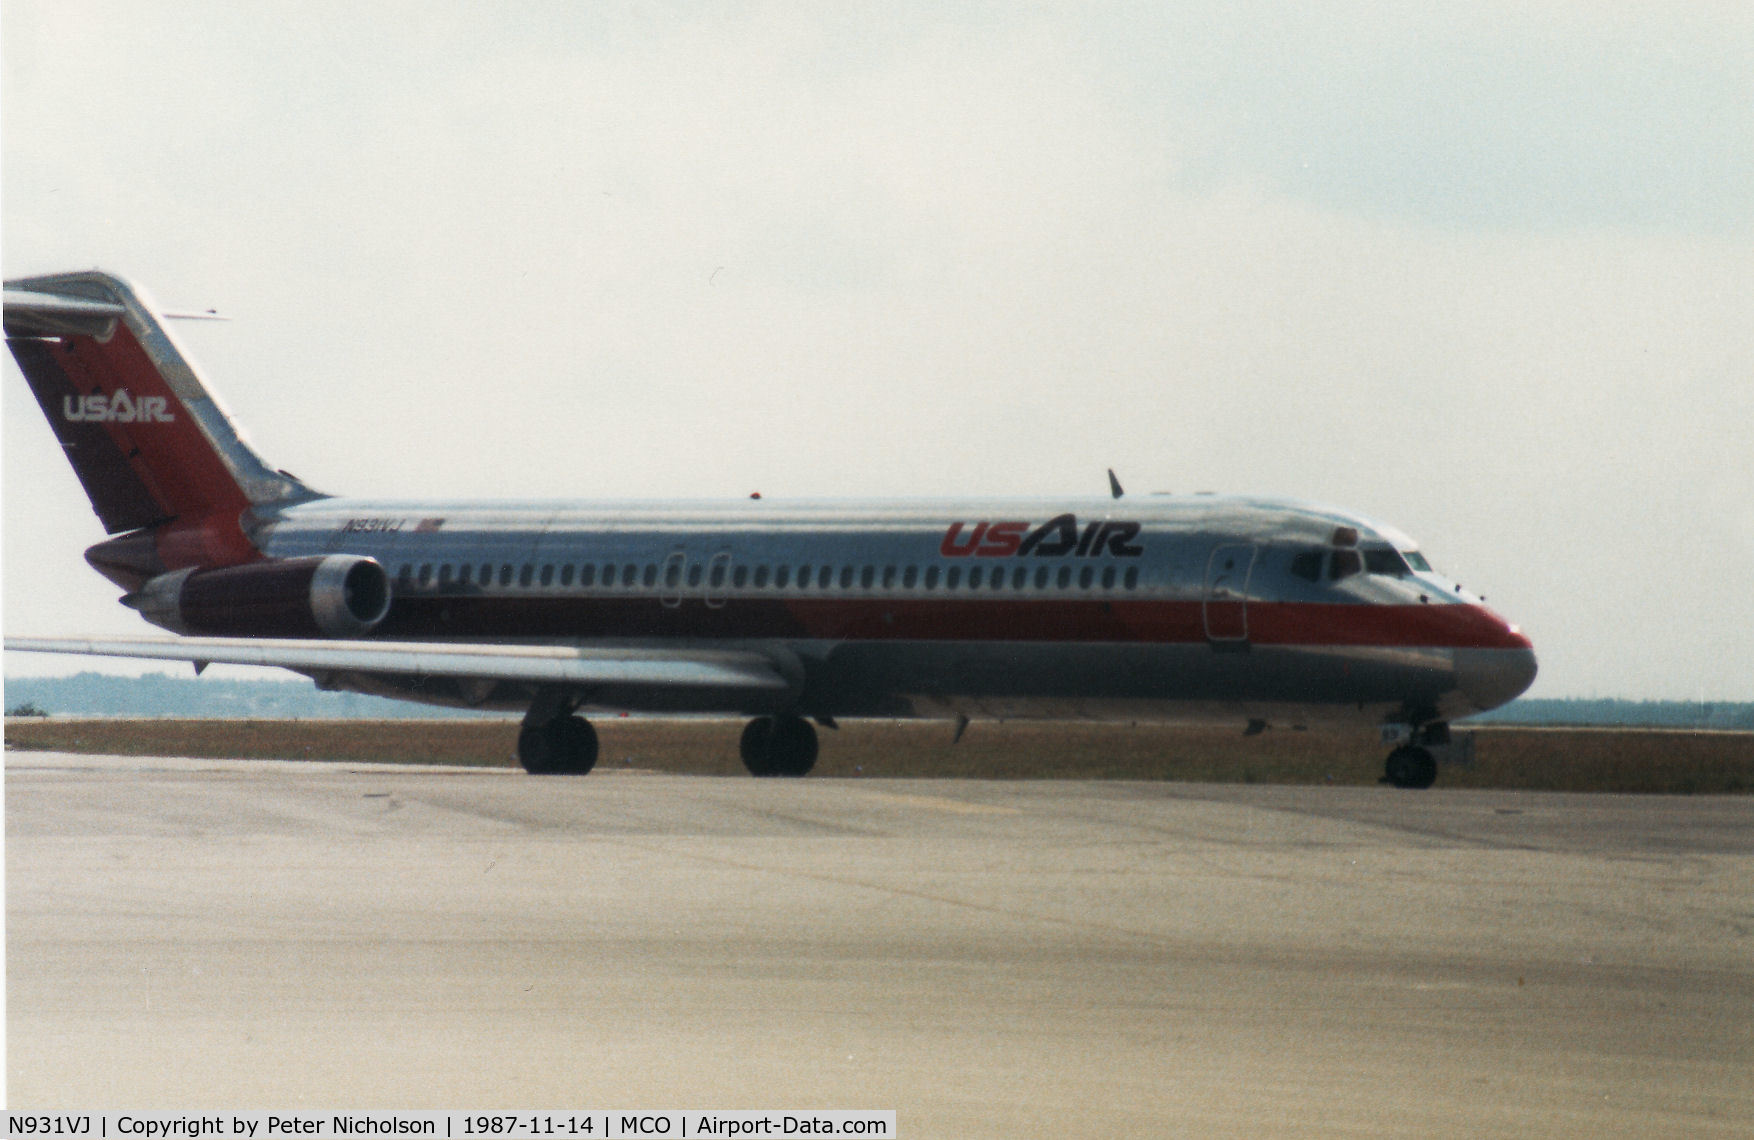 N931VJ, 1968 Douglas DC-9-31 C/N 47188, DC-9-31 of US Air taxying to the active runway at Orlando in November 1987.